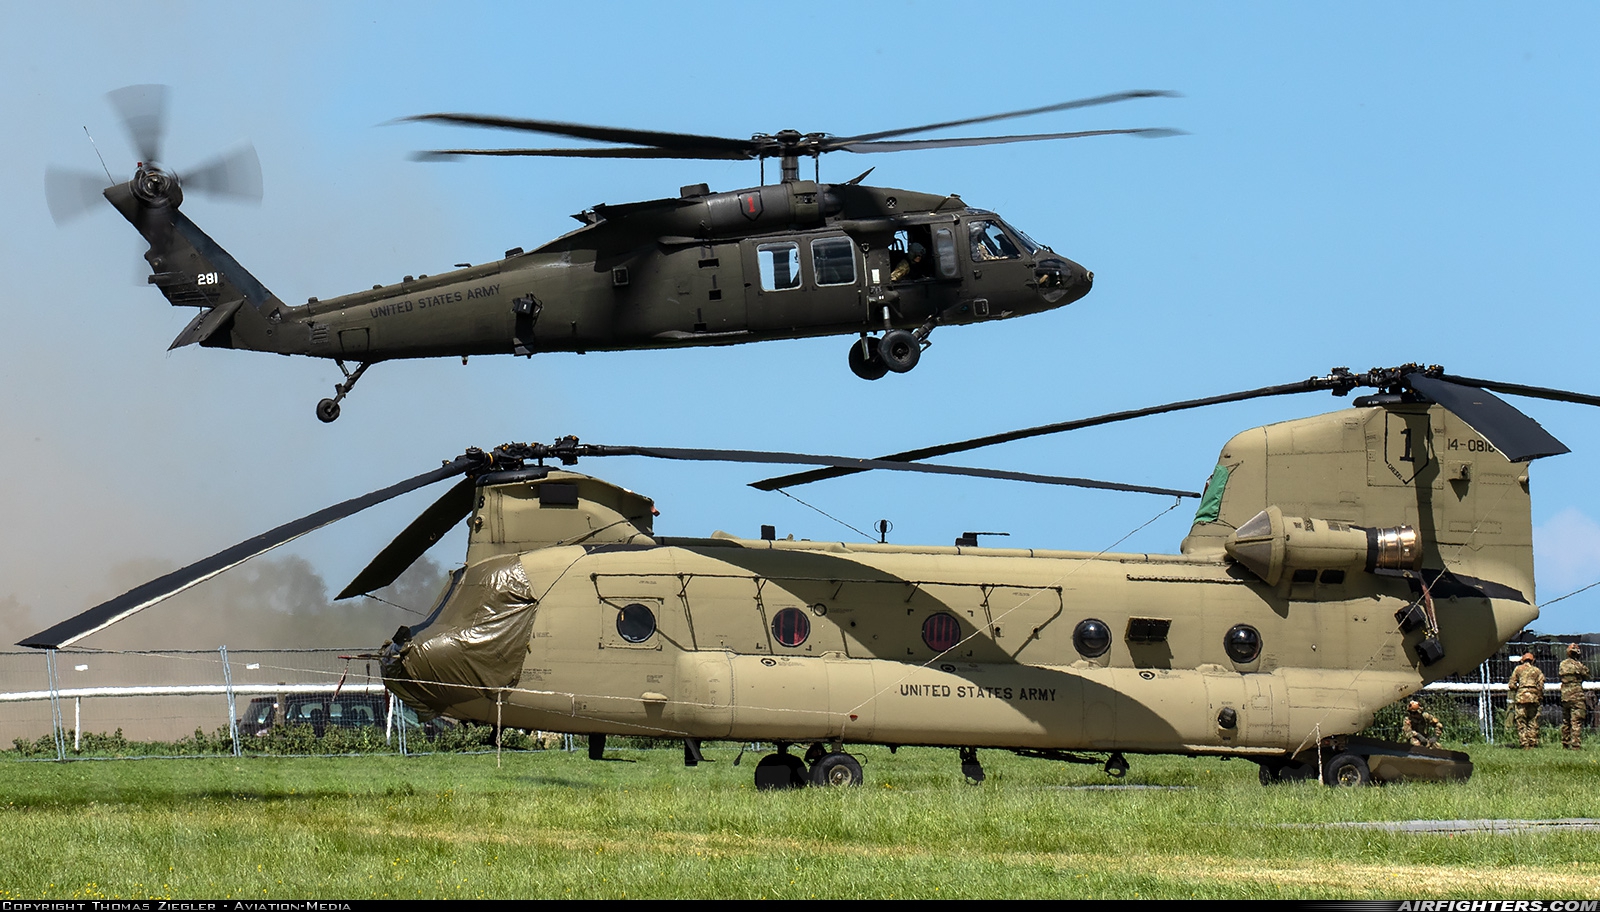 USA - Army Sikorsky UH-60M Black Hawk (S-70A) 10-20281 at Off-Airport - Carentan, France